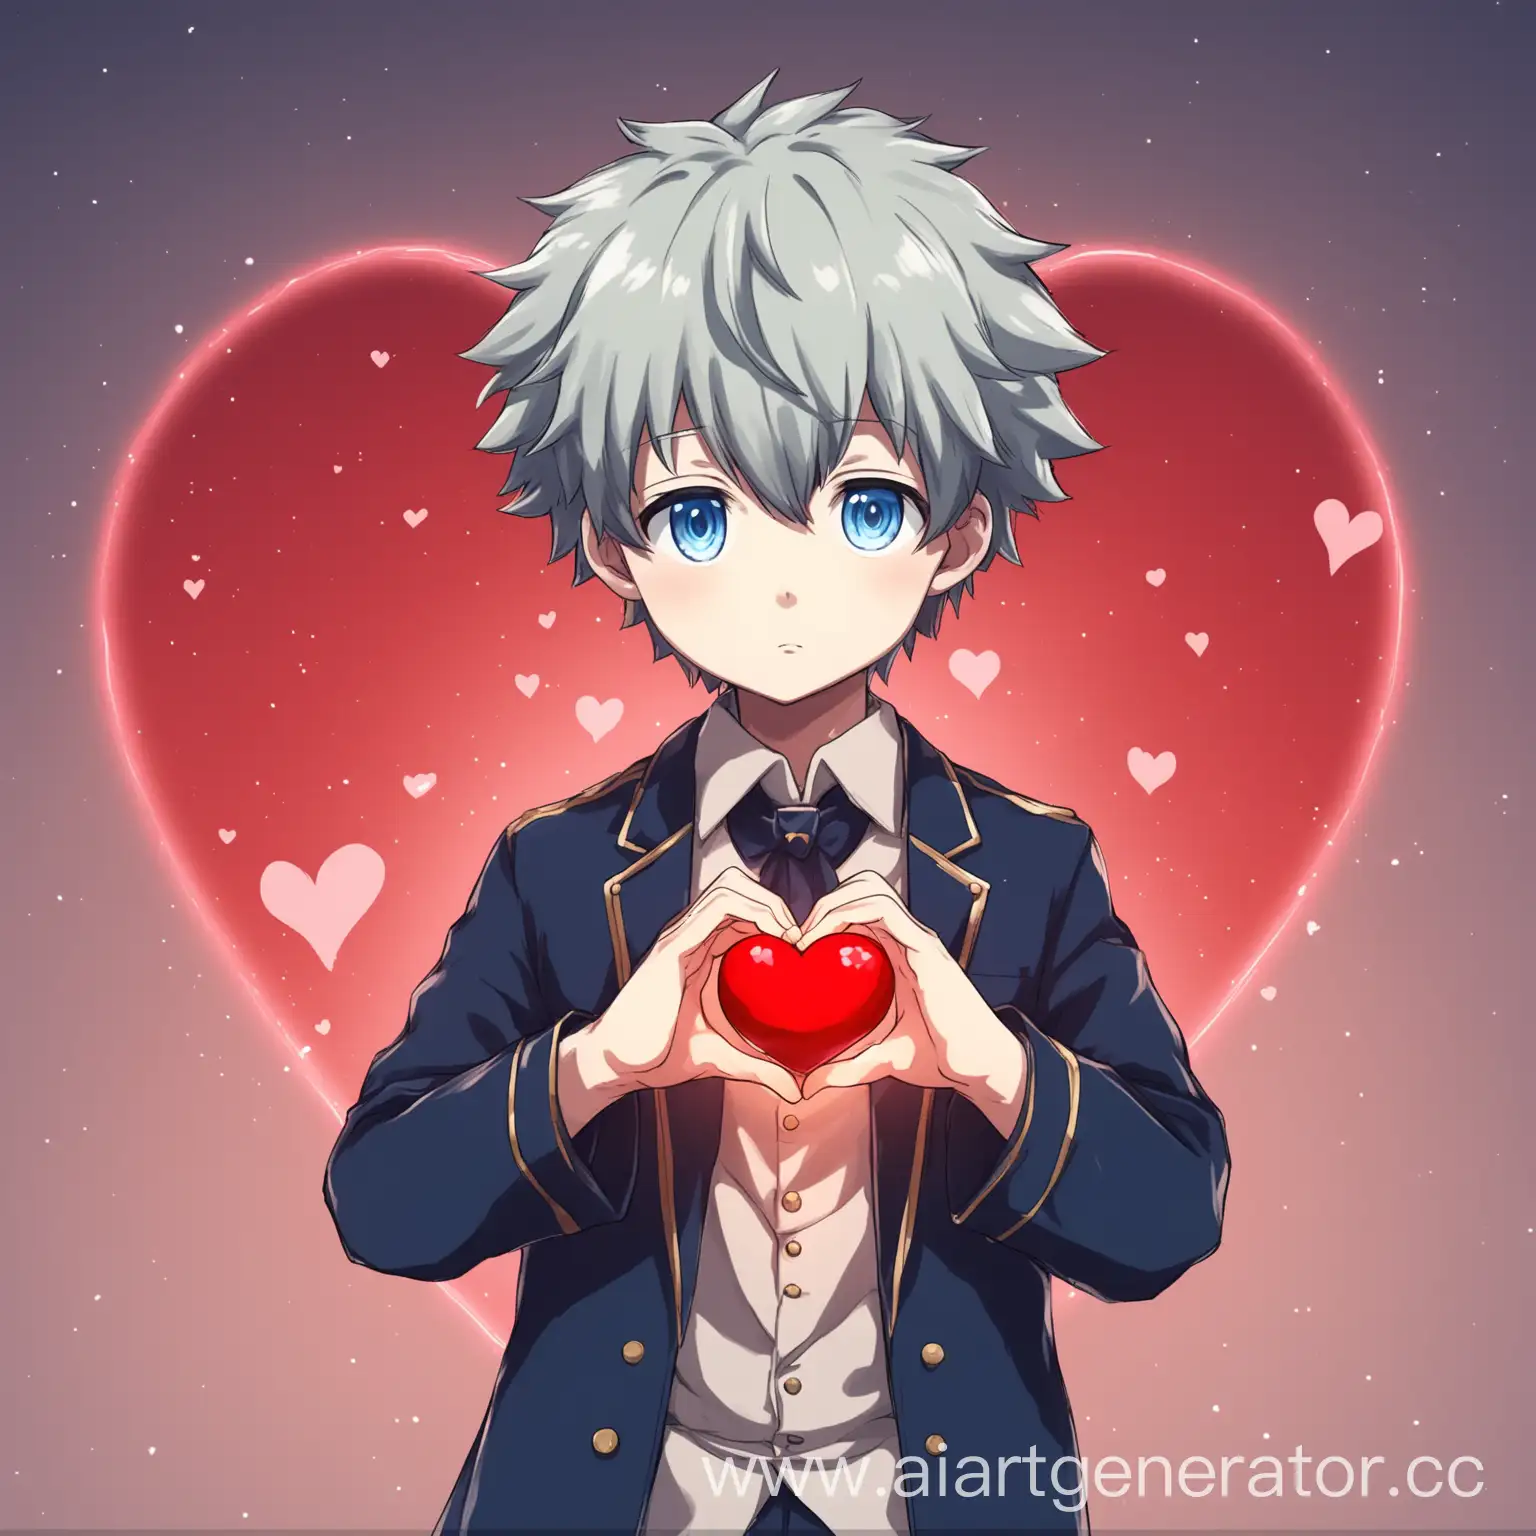 Draw an anime character Sotor Gyoje holding a heart in his hands